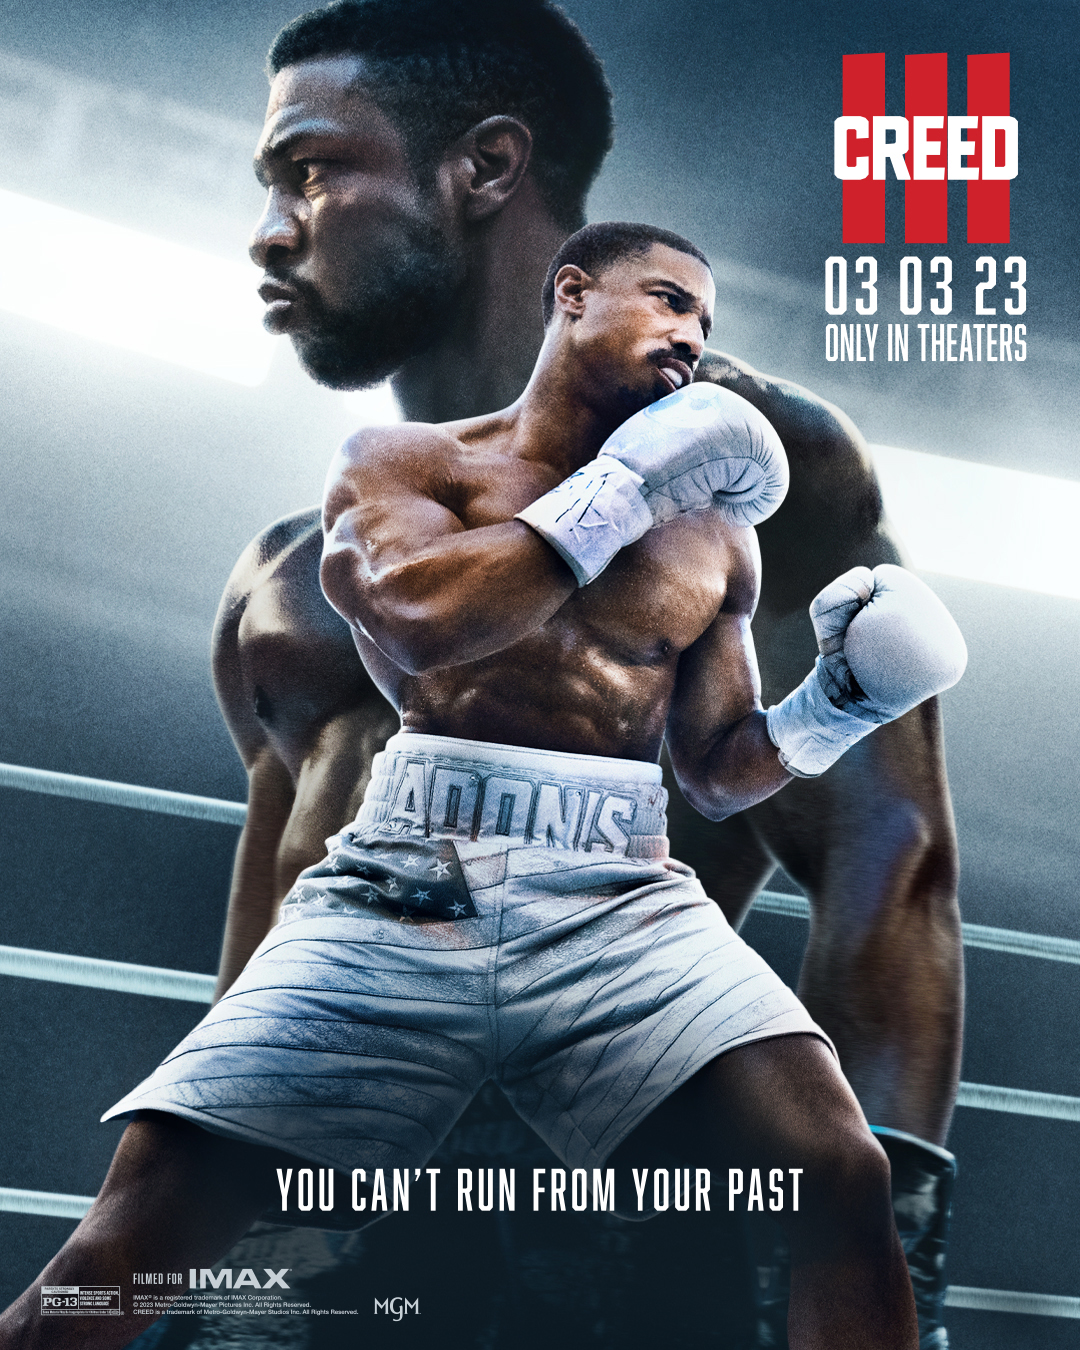 Movie poster art for ‘Creed III’